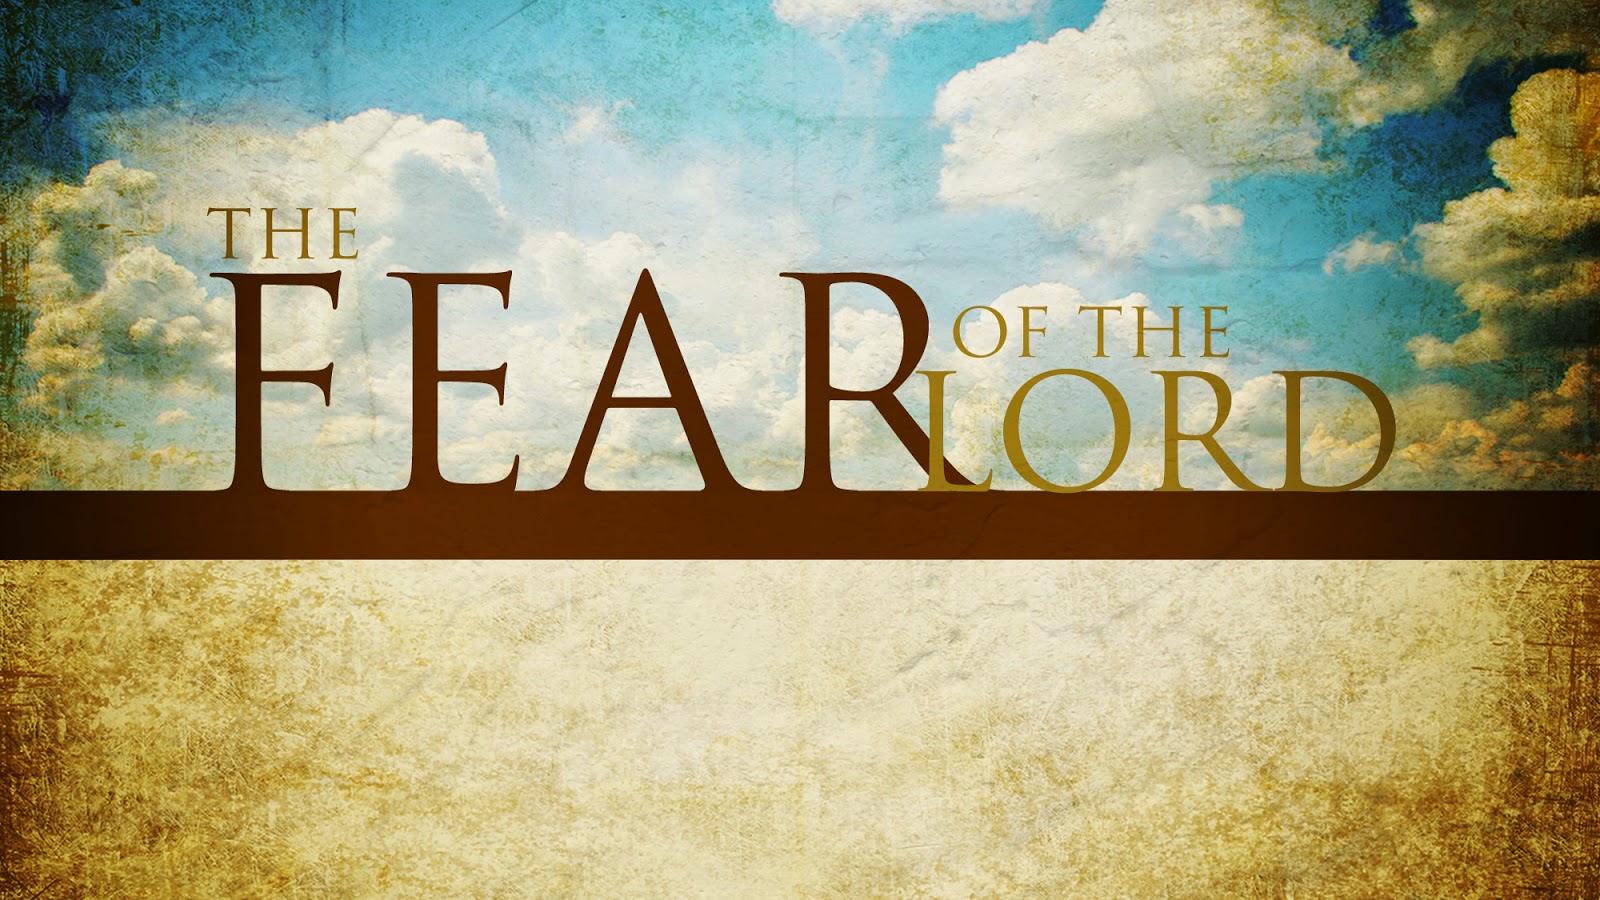 http://bible-daily.org/2014/04/05/spurgeon-fear-of-god-vs-fear-of-man/